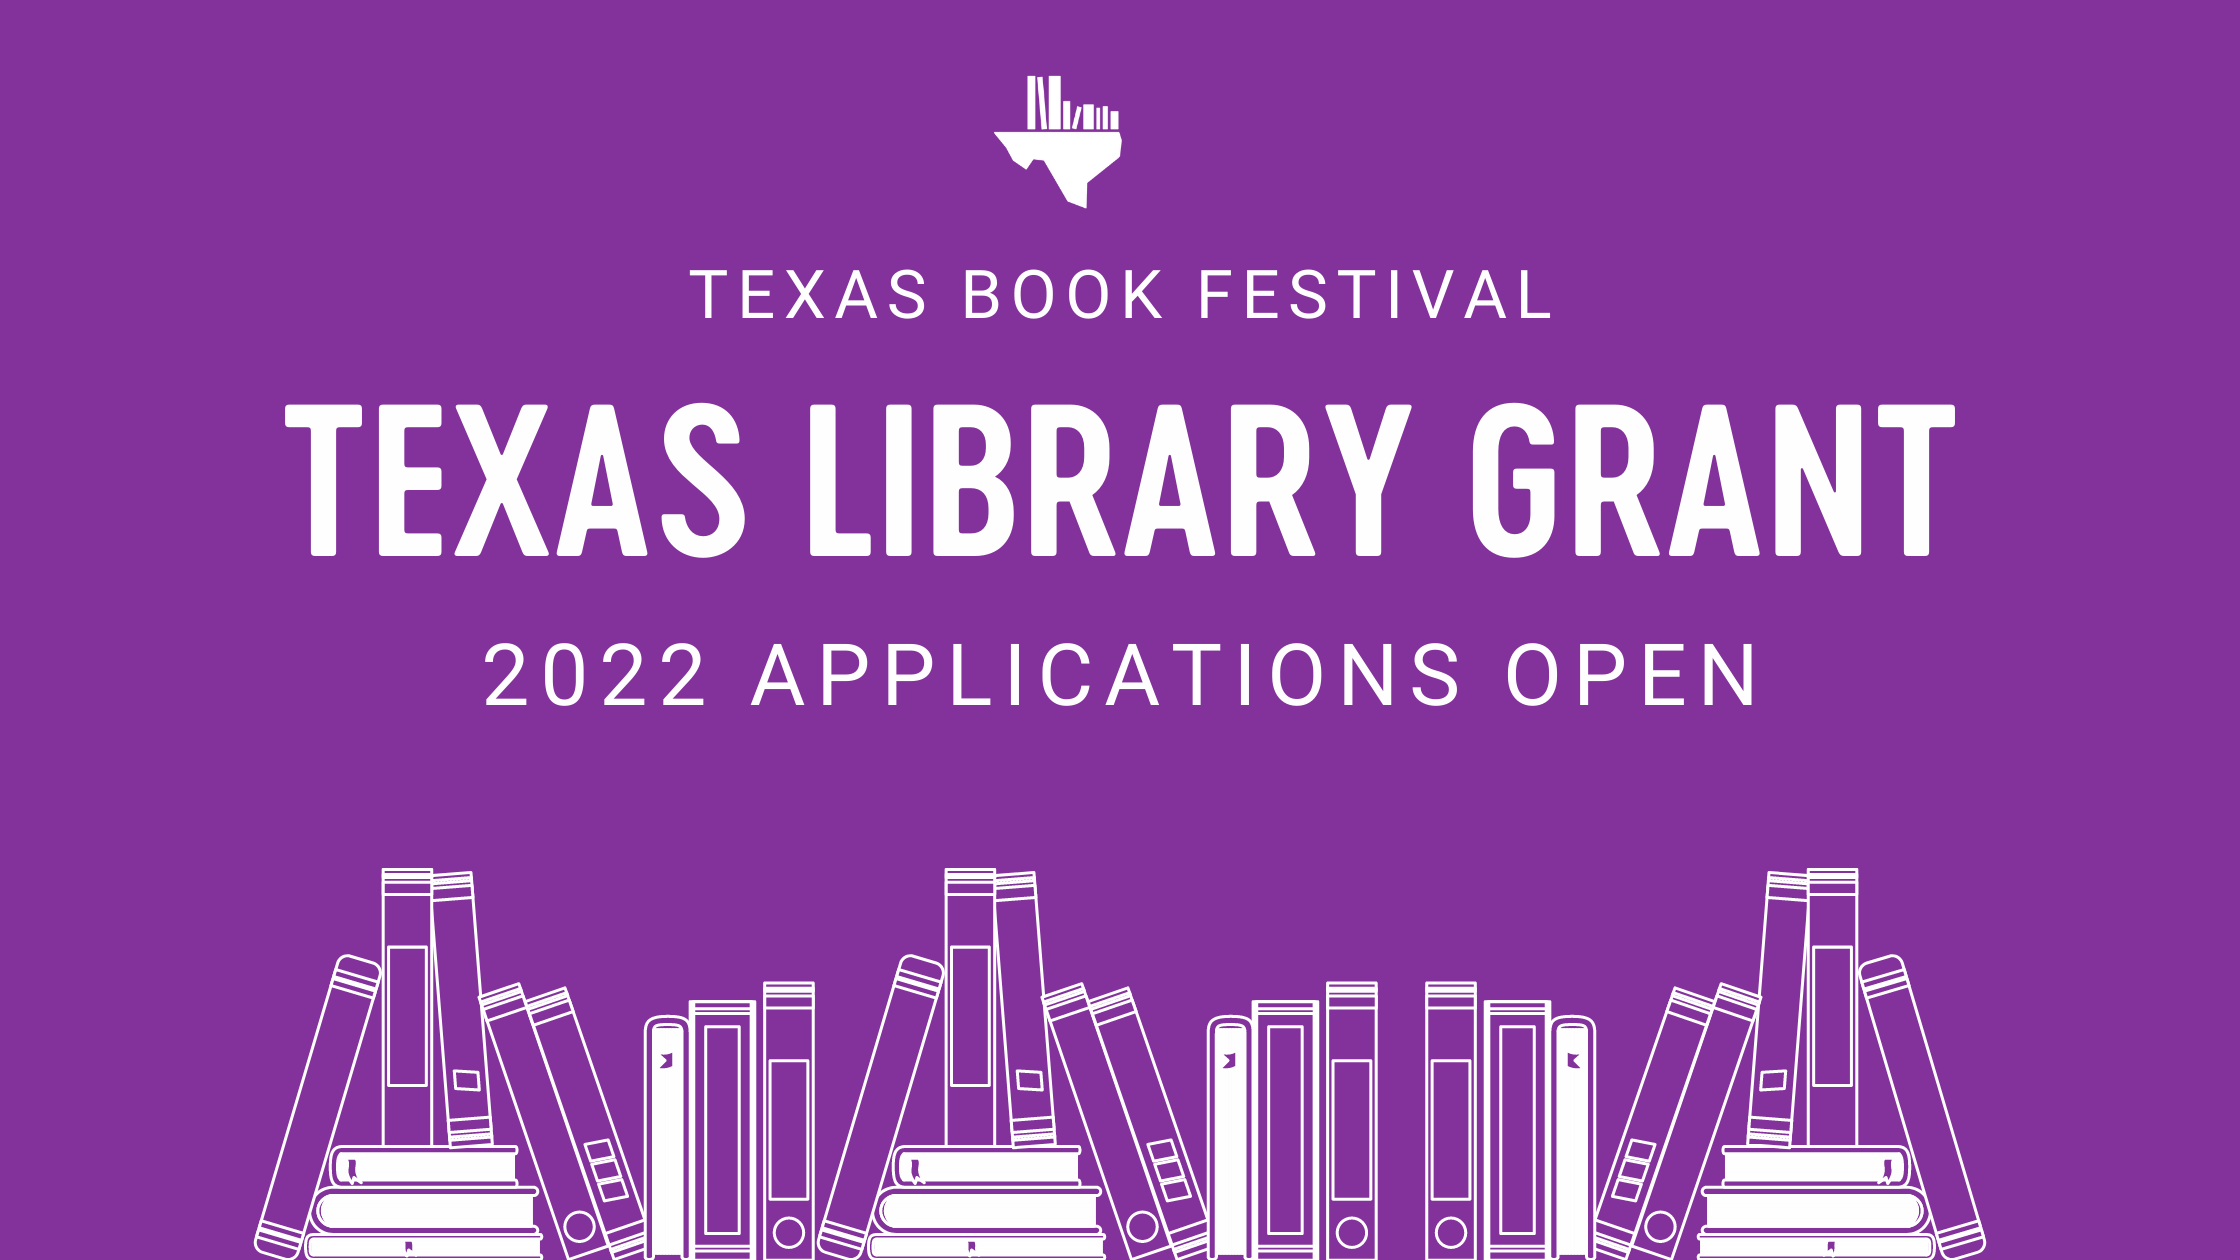 Applications for 2022 Texas Library Grants are now open!